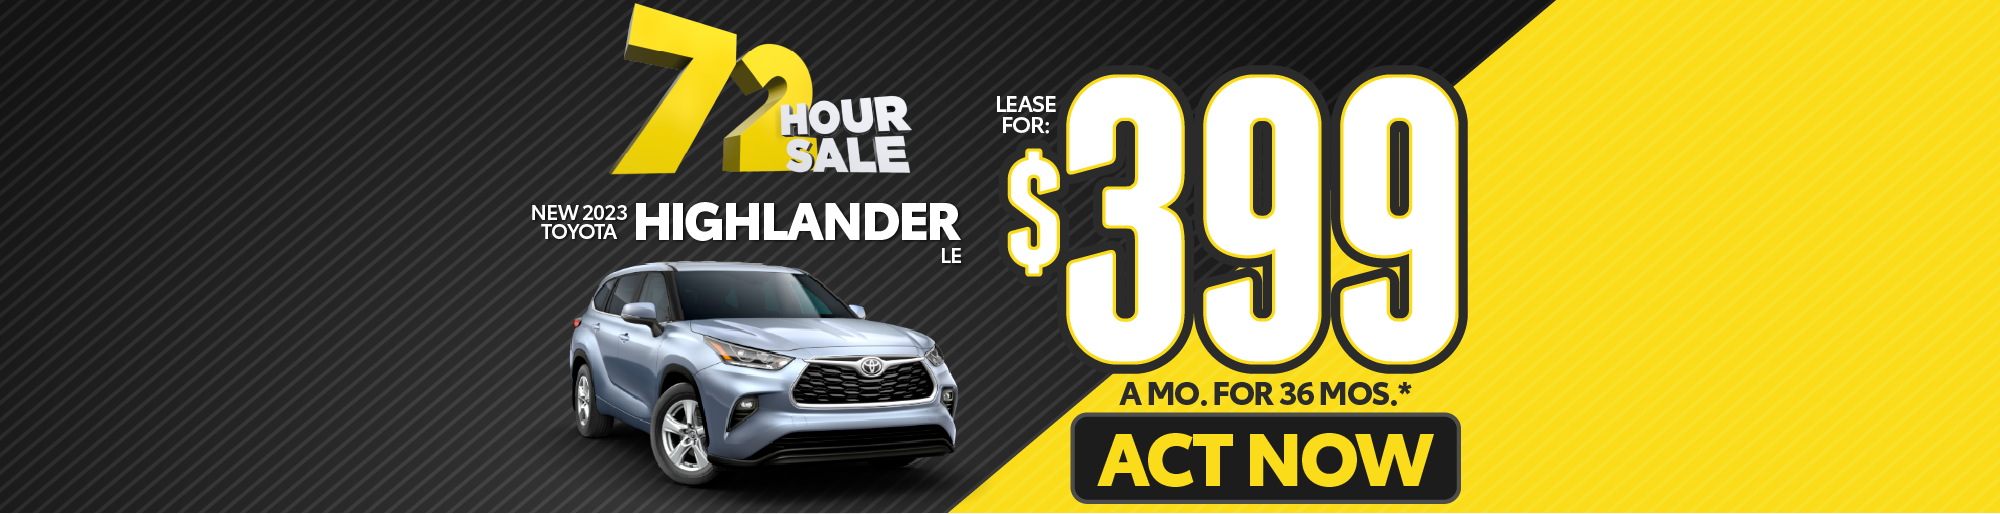 New 2023 Toyota Highlander LE Lease for only $399/mo.* ACT NOW